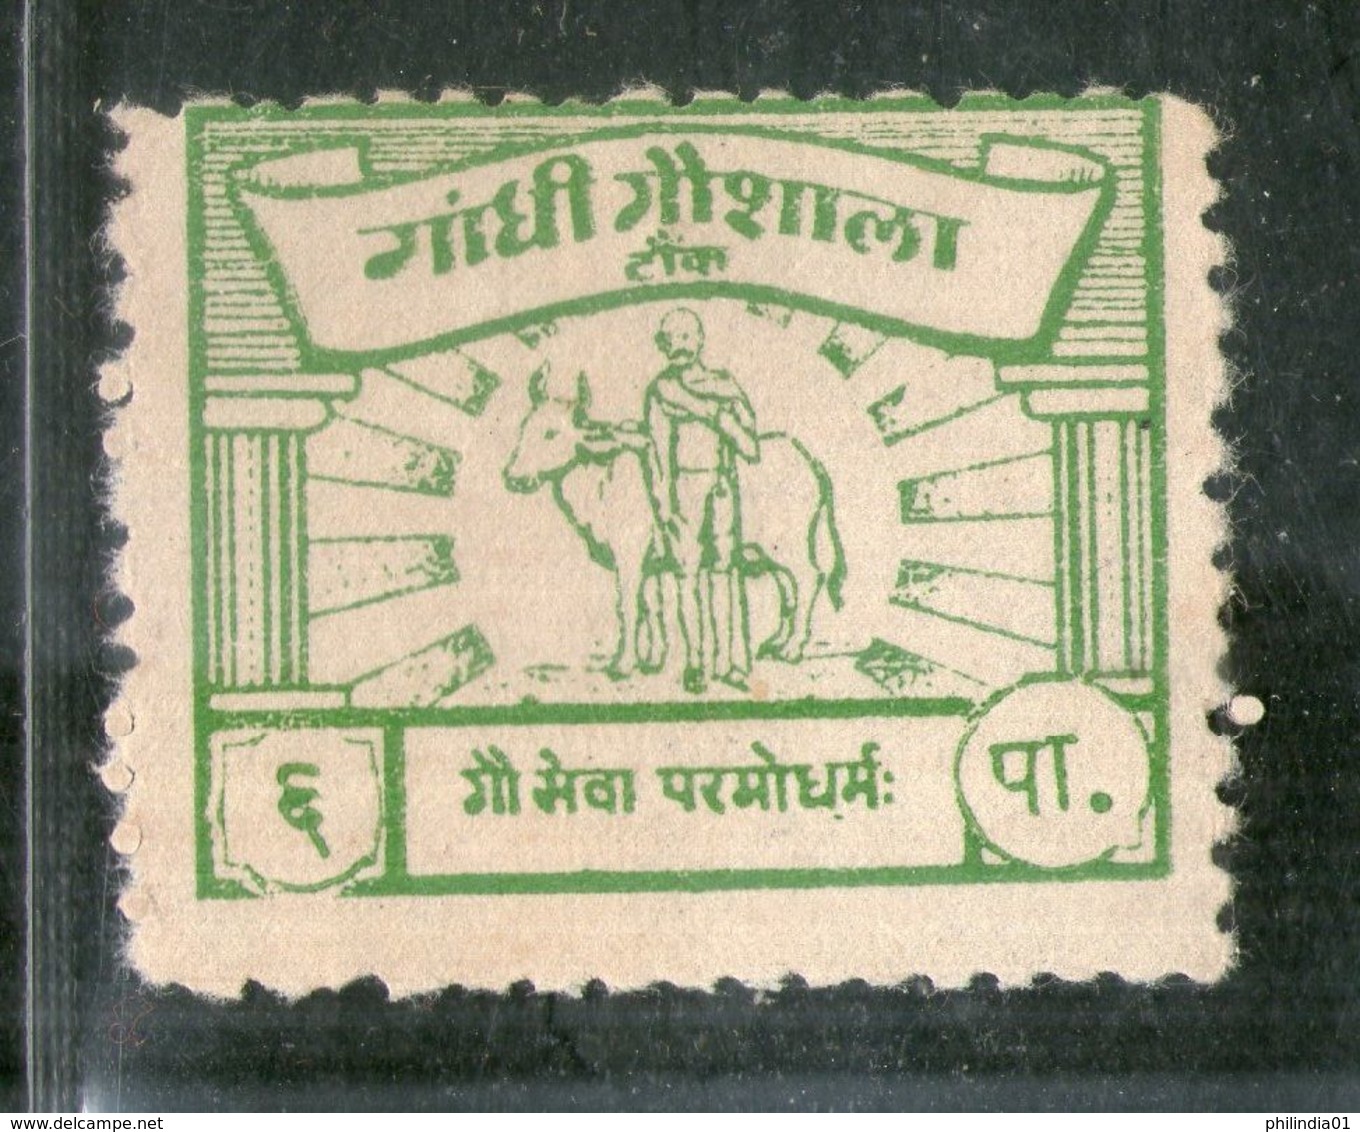 India 6ps Gandhi Gaushala Tonk Charity Label Extremely RARE # 1422 - Charity Stamps